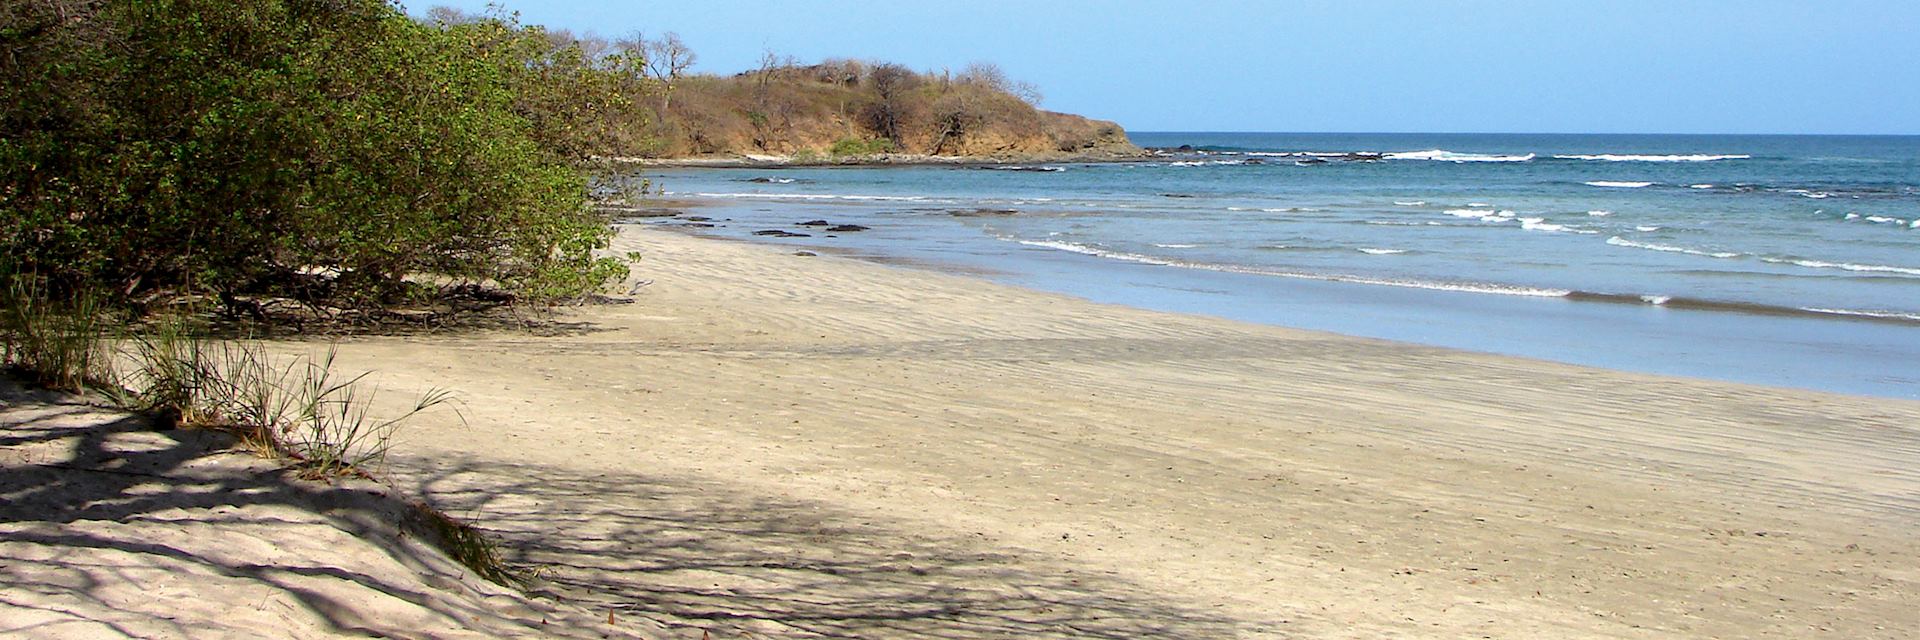 Visit Tamarindo On A Trip To Costa Rica Audley Travel